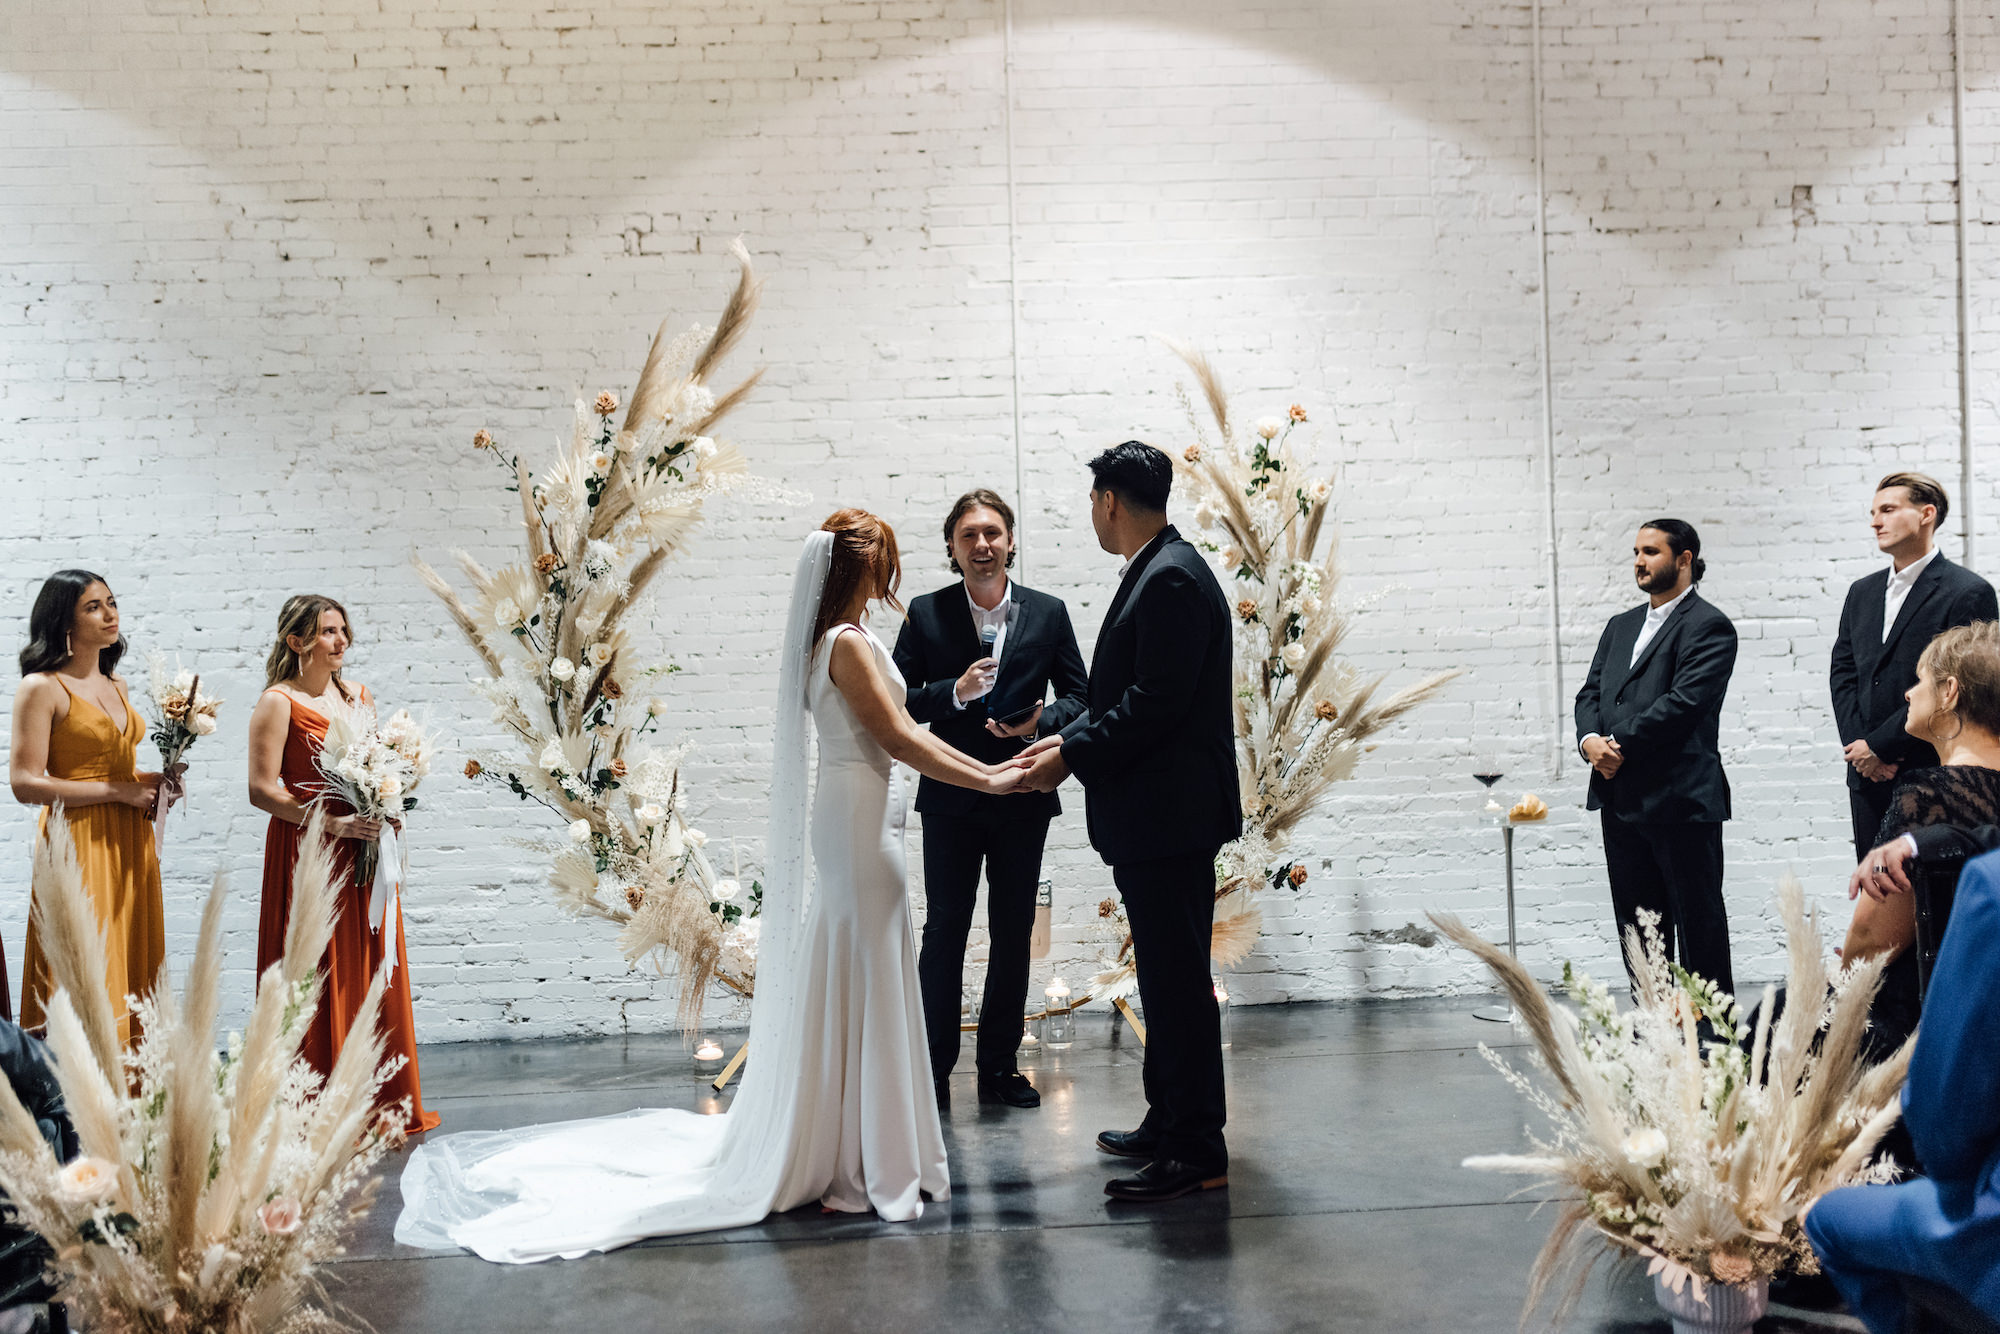 Asymmetrical Round Boho Arch with Boho Pampas Grass White Palm Frond Floral Arrangements | Lakeland Industrial Wedding Venue with White Brick Walls Haus 820